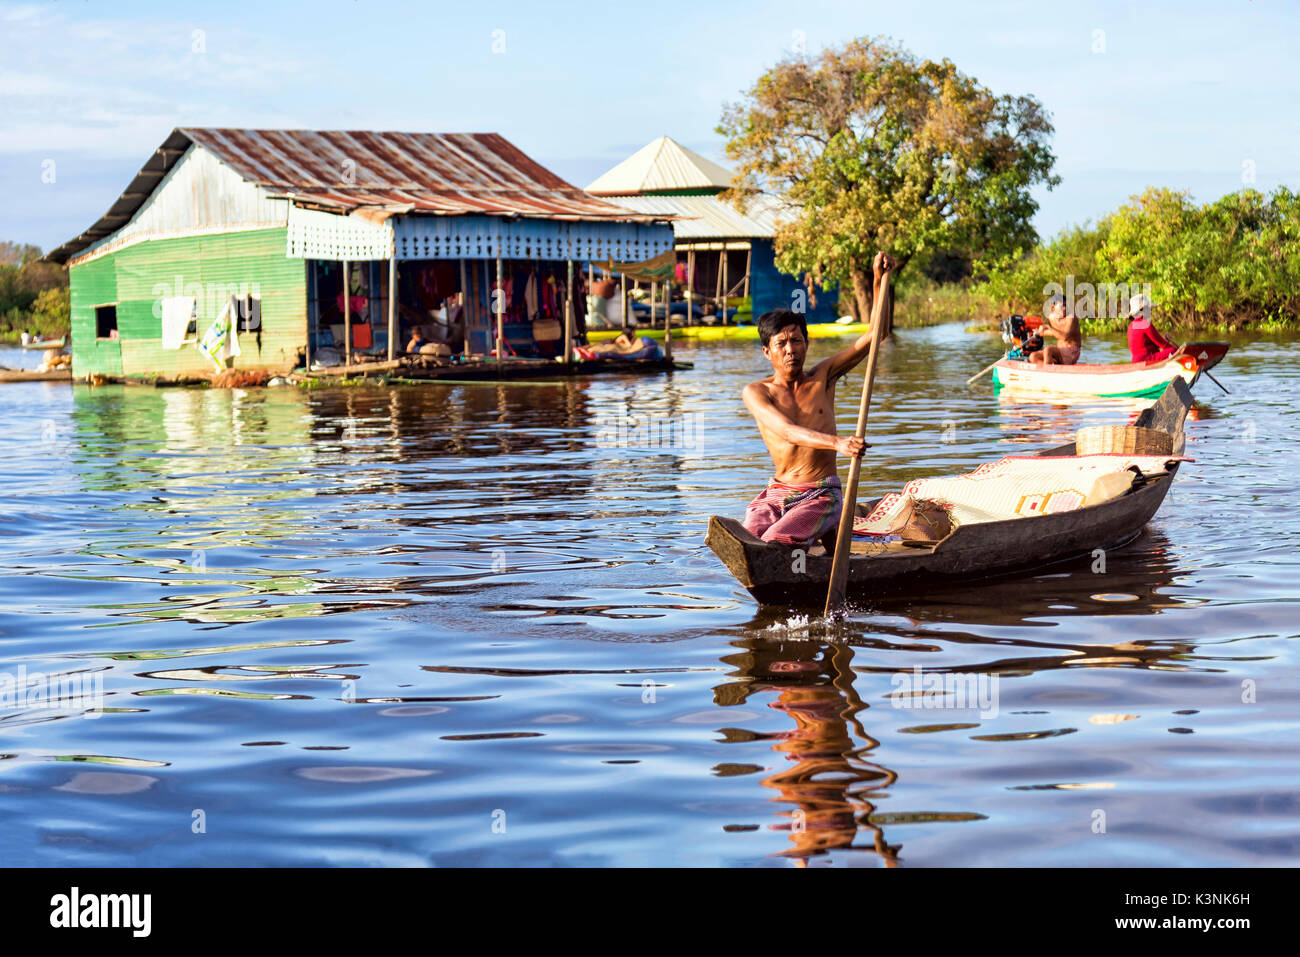 Tonle Sap lake, Cambodia - January 04, 2017: View of an unidentified man rowing in his boat. Tonle Sap refers to a freshwater lake Stock Photo